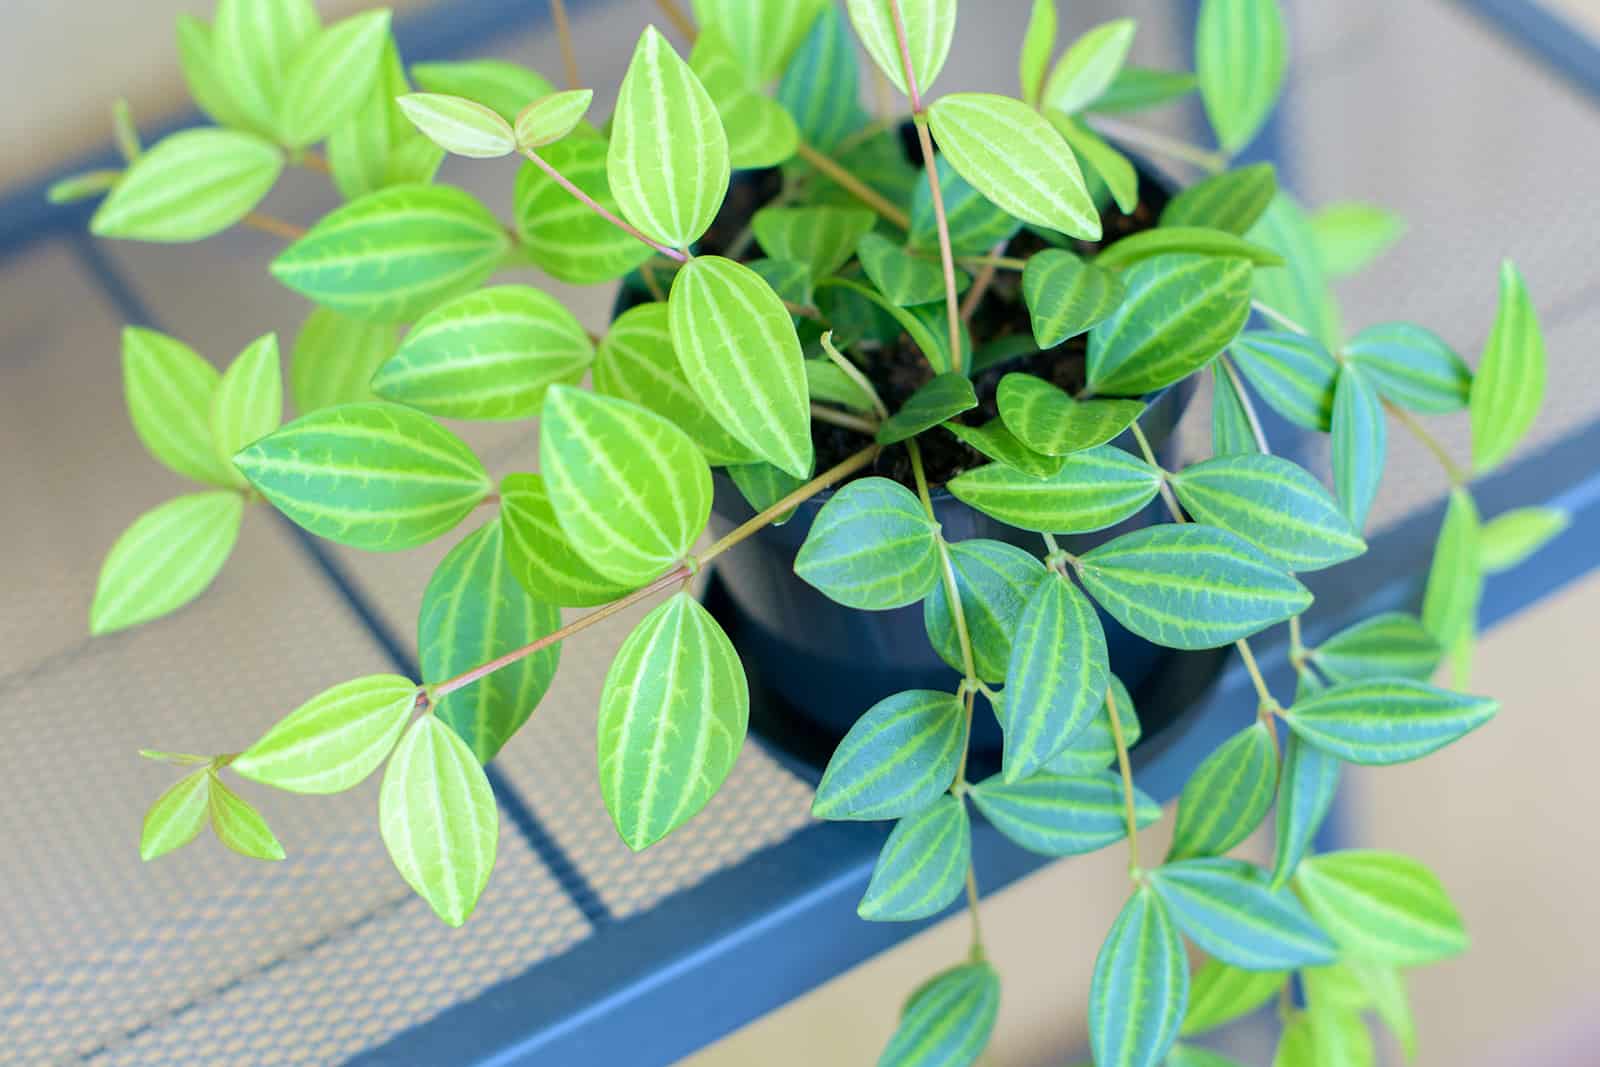 Peperomia Angulata: What Are The Main Features And Care Tips?